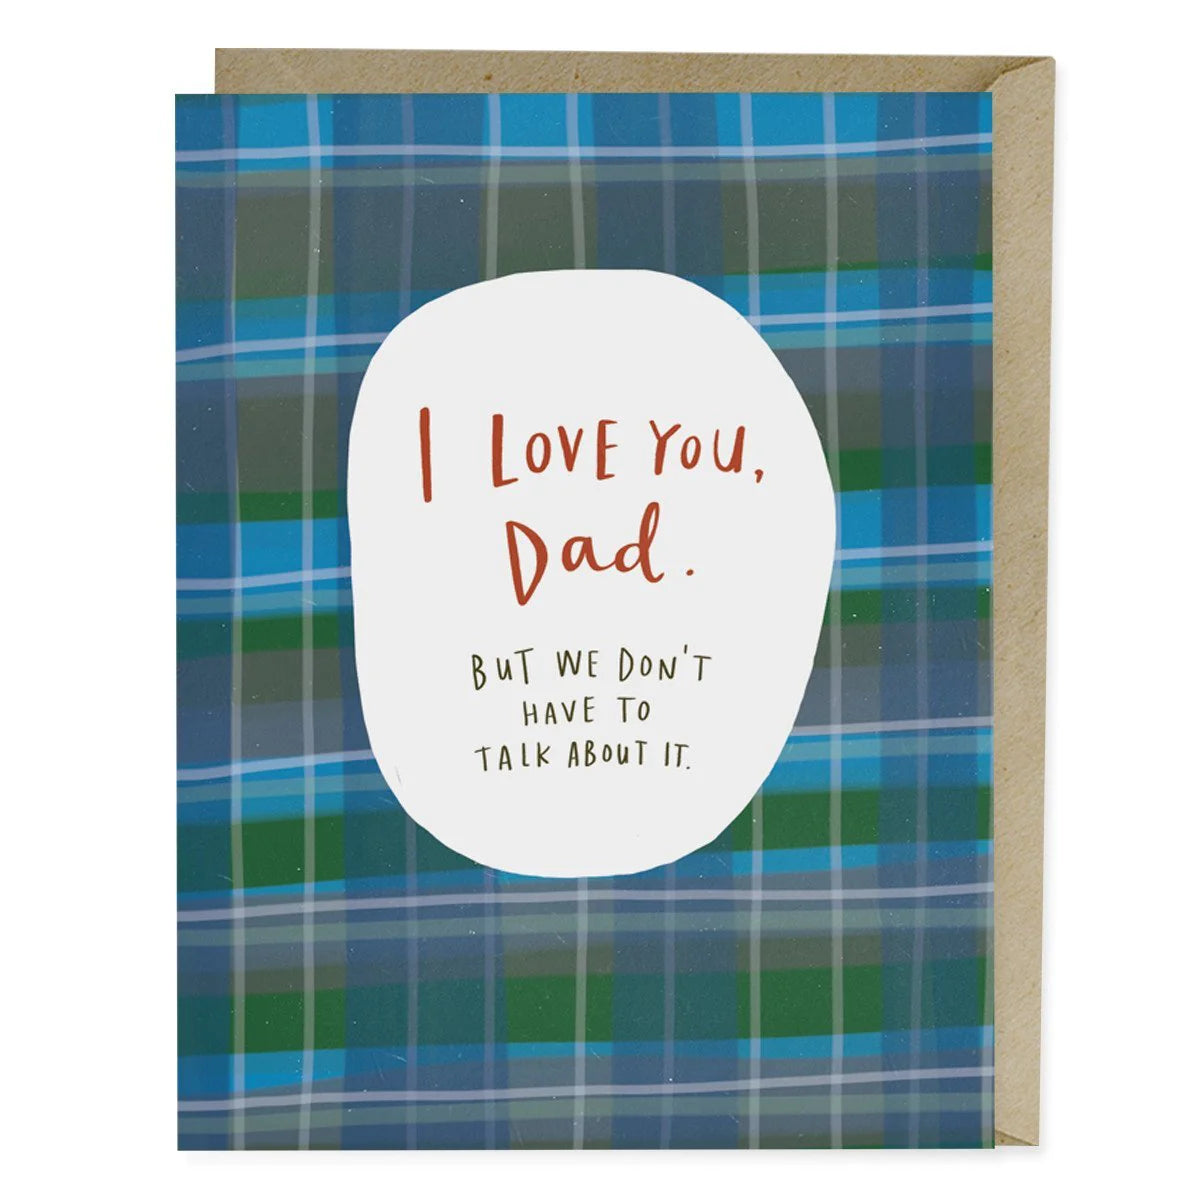 I Love You Dad But We Don't Have to Talk About It Greeting Card